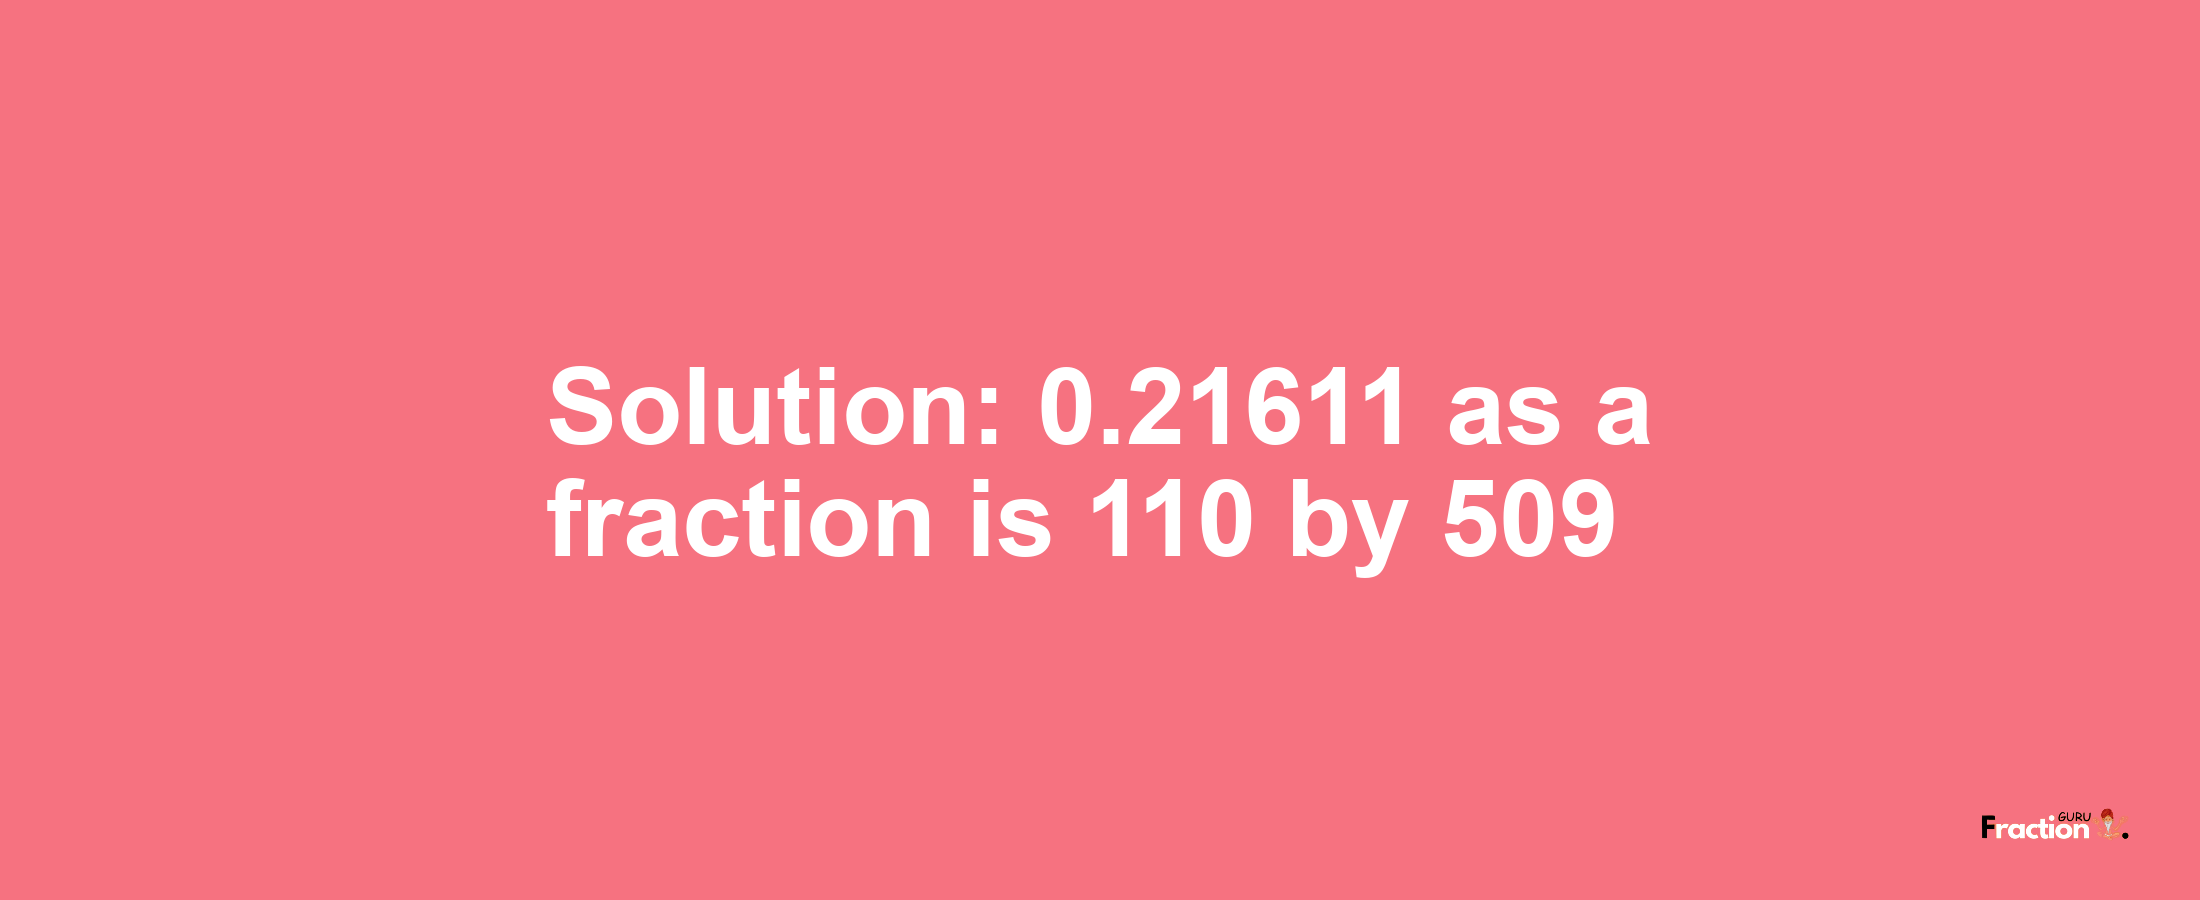 Solution:0.21611 as a fraction is 110/509